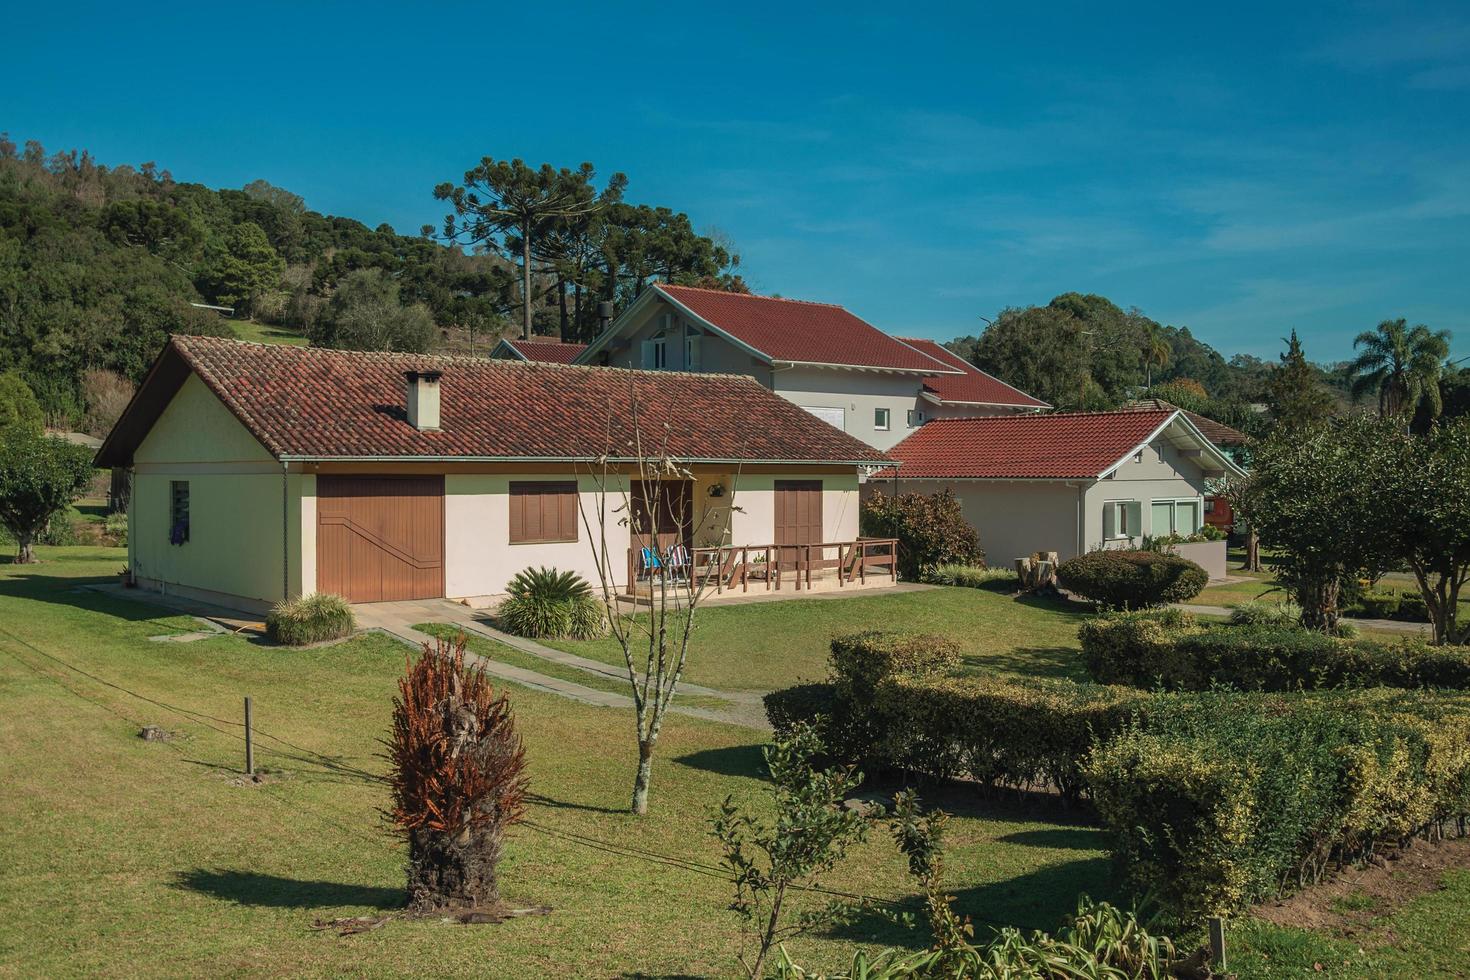 Bento Goncalves, Brazil - July 11, 2019. Modern country house with pathway and garden in a rural landscape near Bento Goncalves. photo